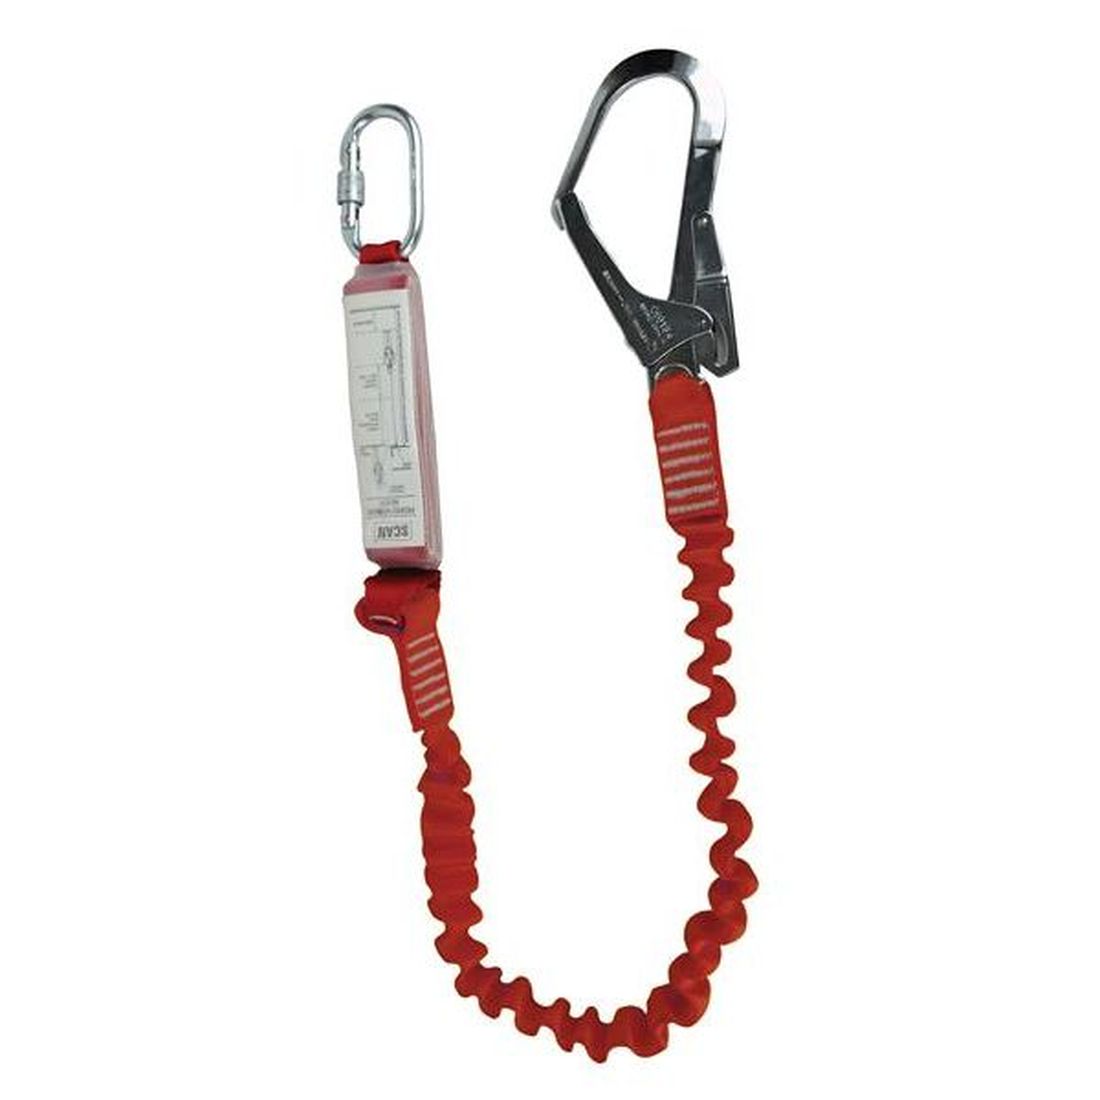 Scan Fall Arrest Lanyard 1.8m  Hook & Connect                                        